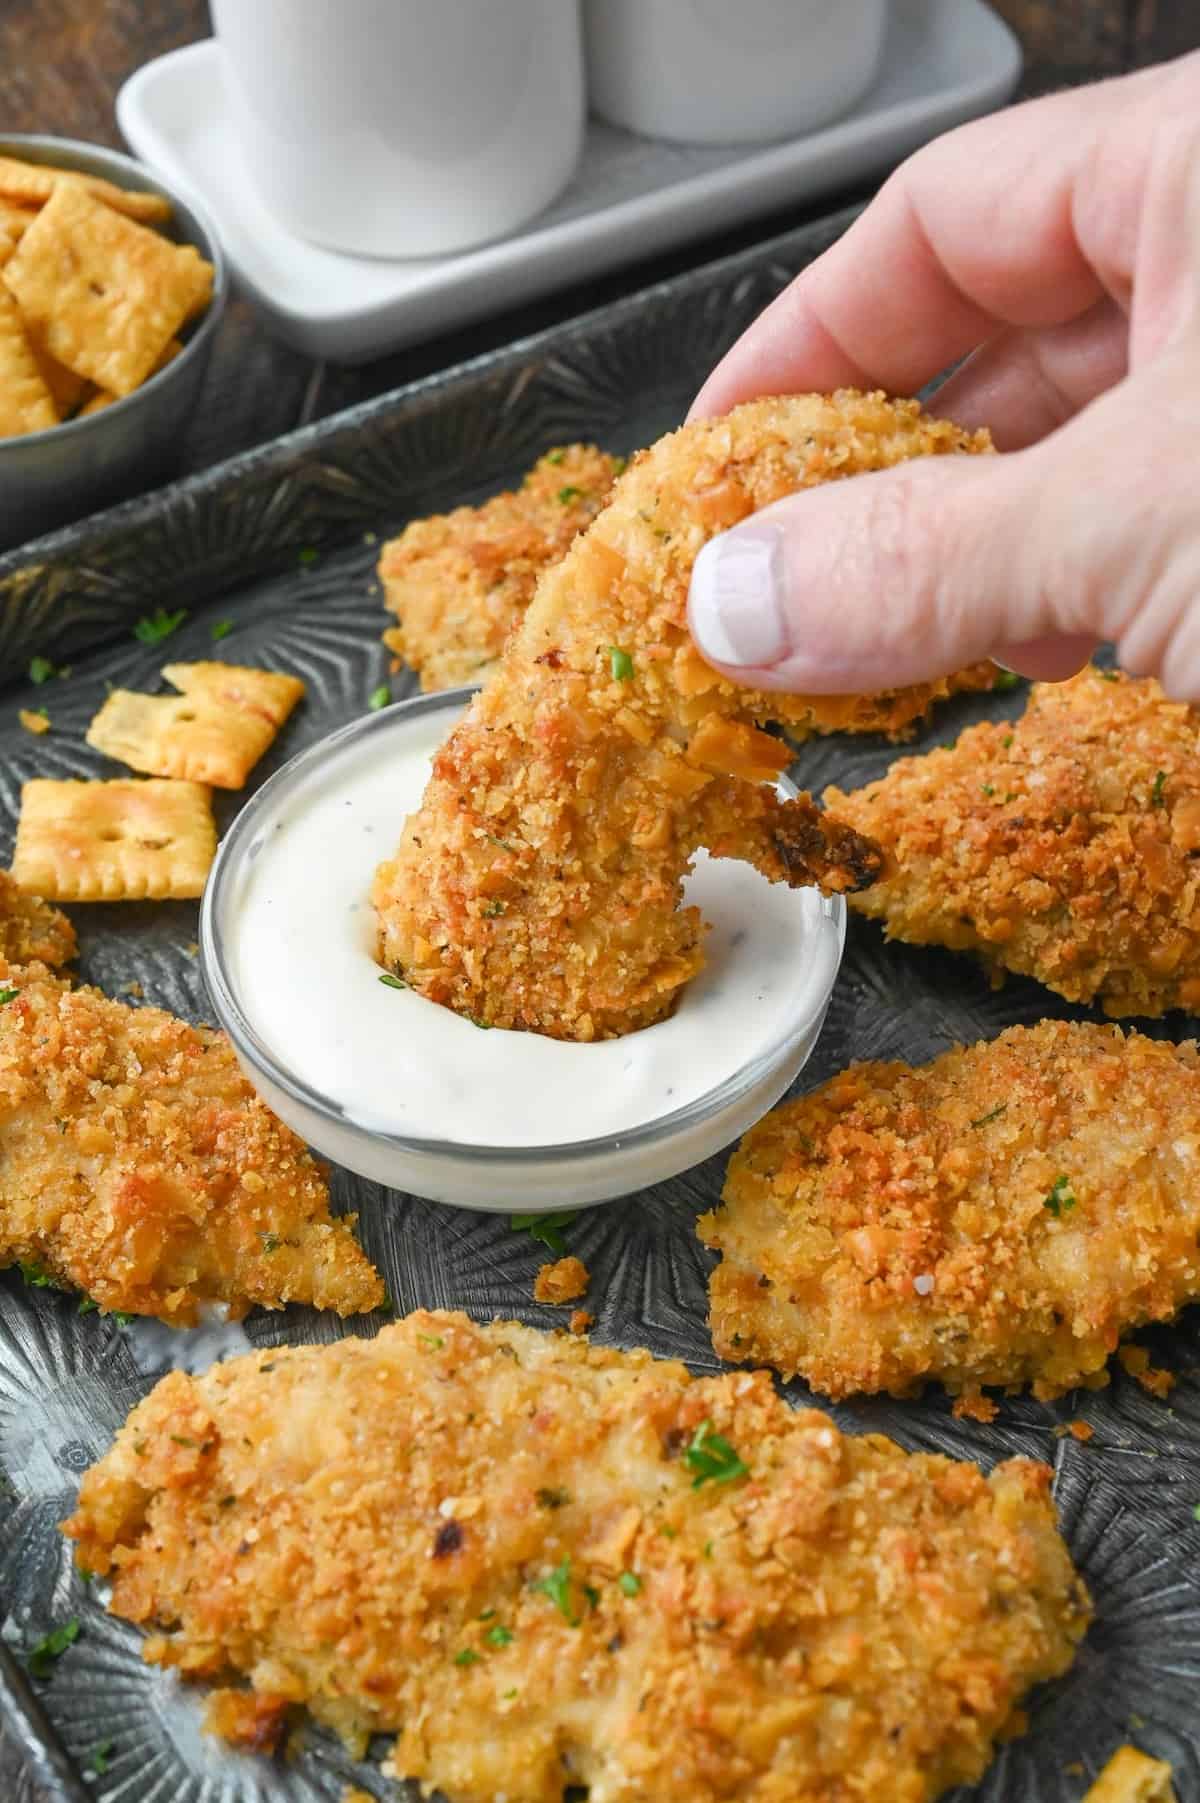 Cheez it chicken tender being dipped into ranch dressing.